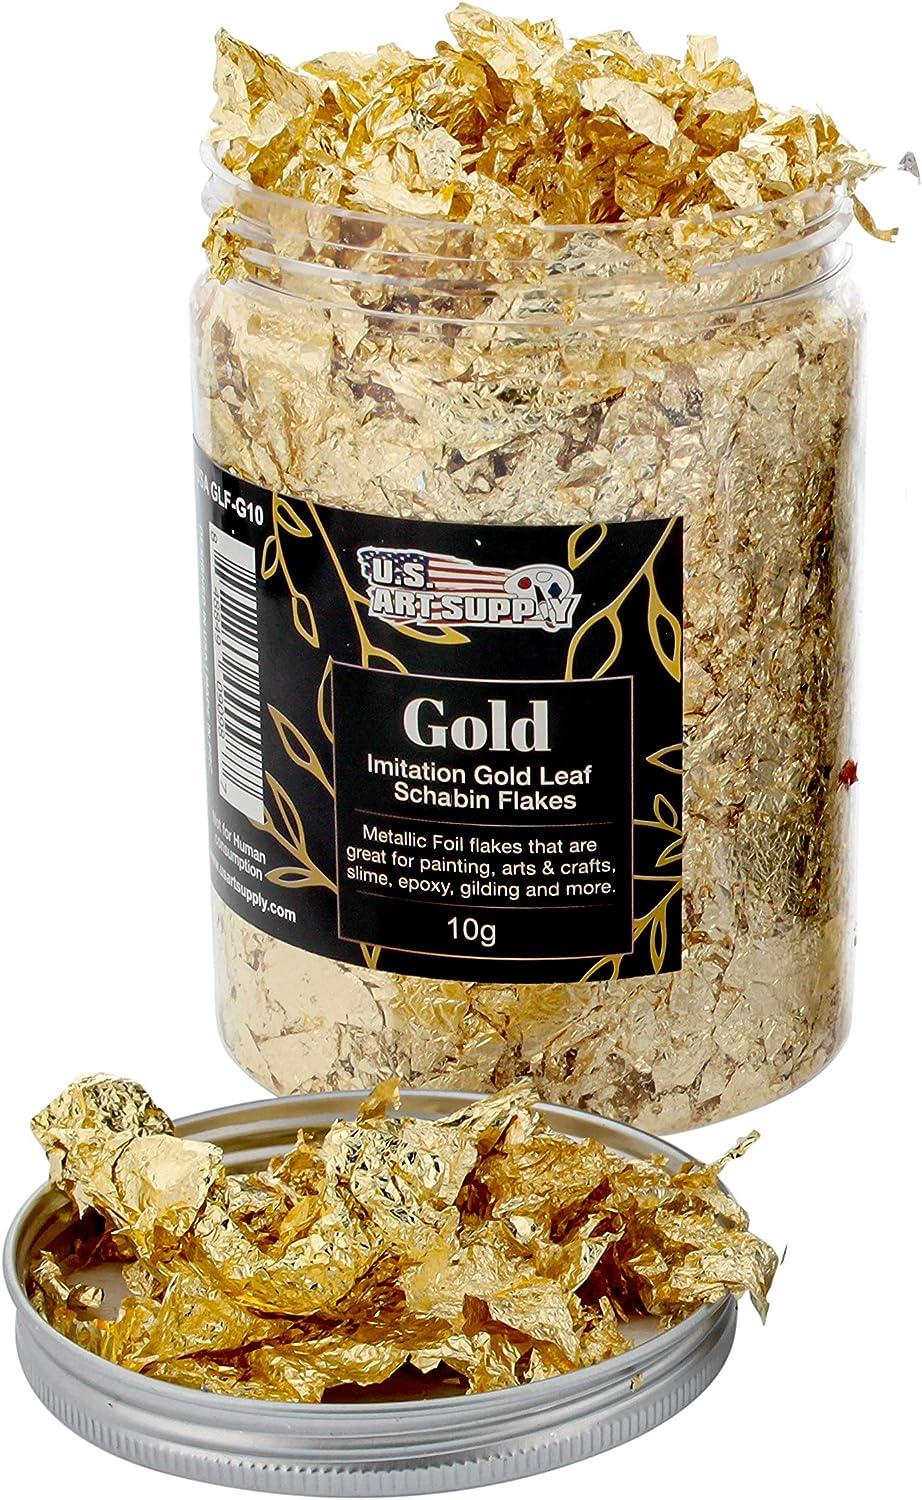 Gold Leaf, Gold Flakes, Gold Foil Flakes for Resin, Imitation Gold Foil  Flakes Metallic Leaf Gold Foil for Nails Painting Crafts Slime and Resin